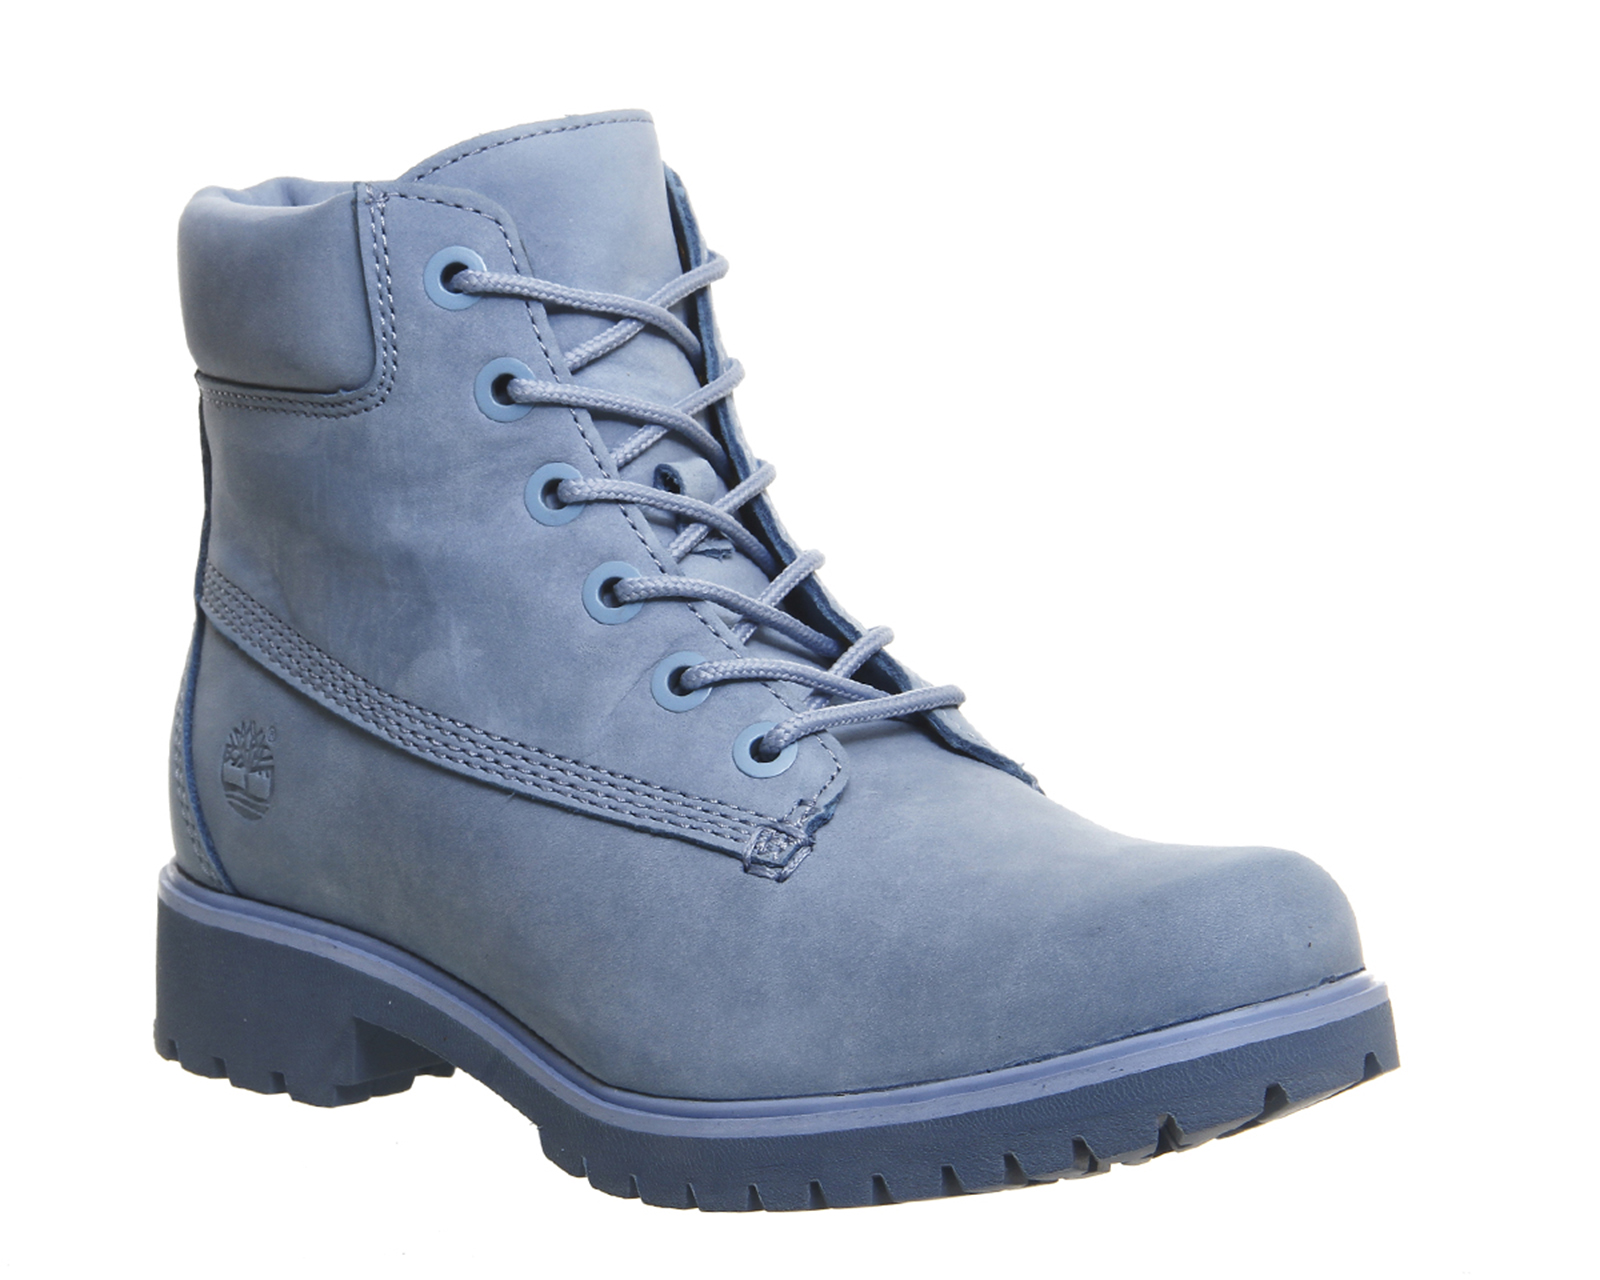 grey and blue timberland boots